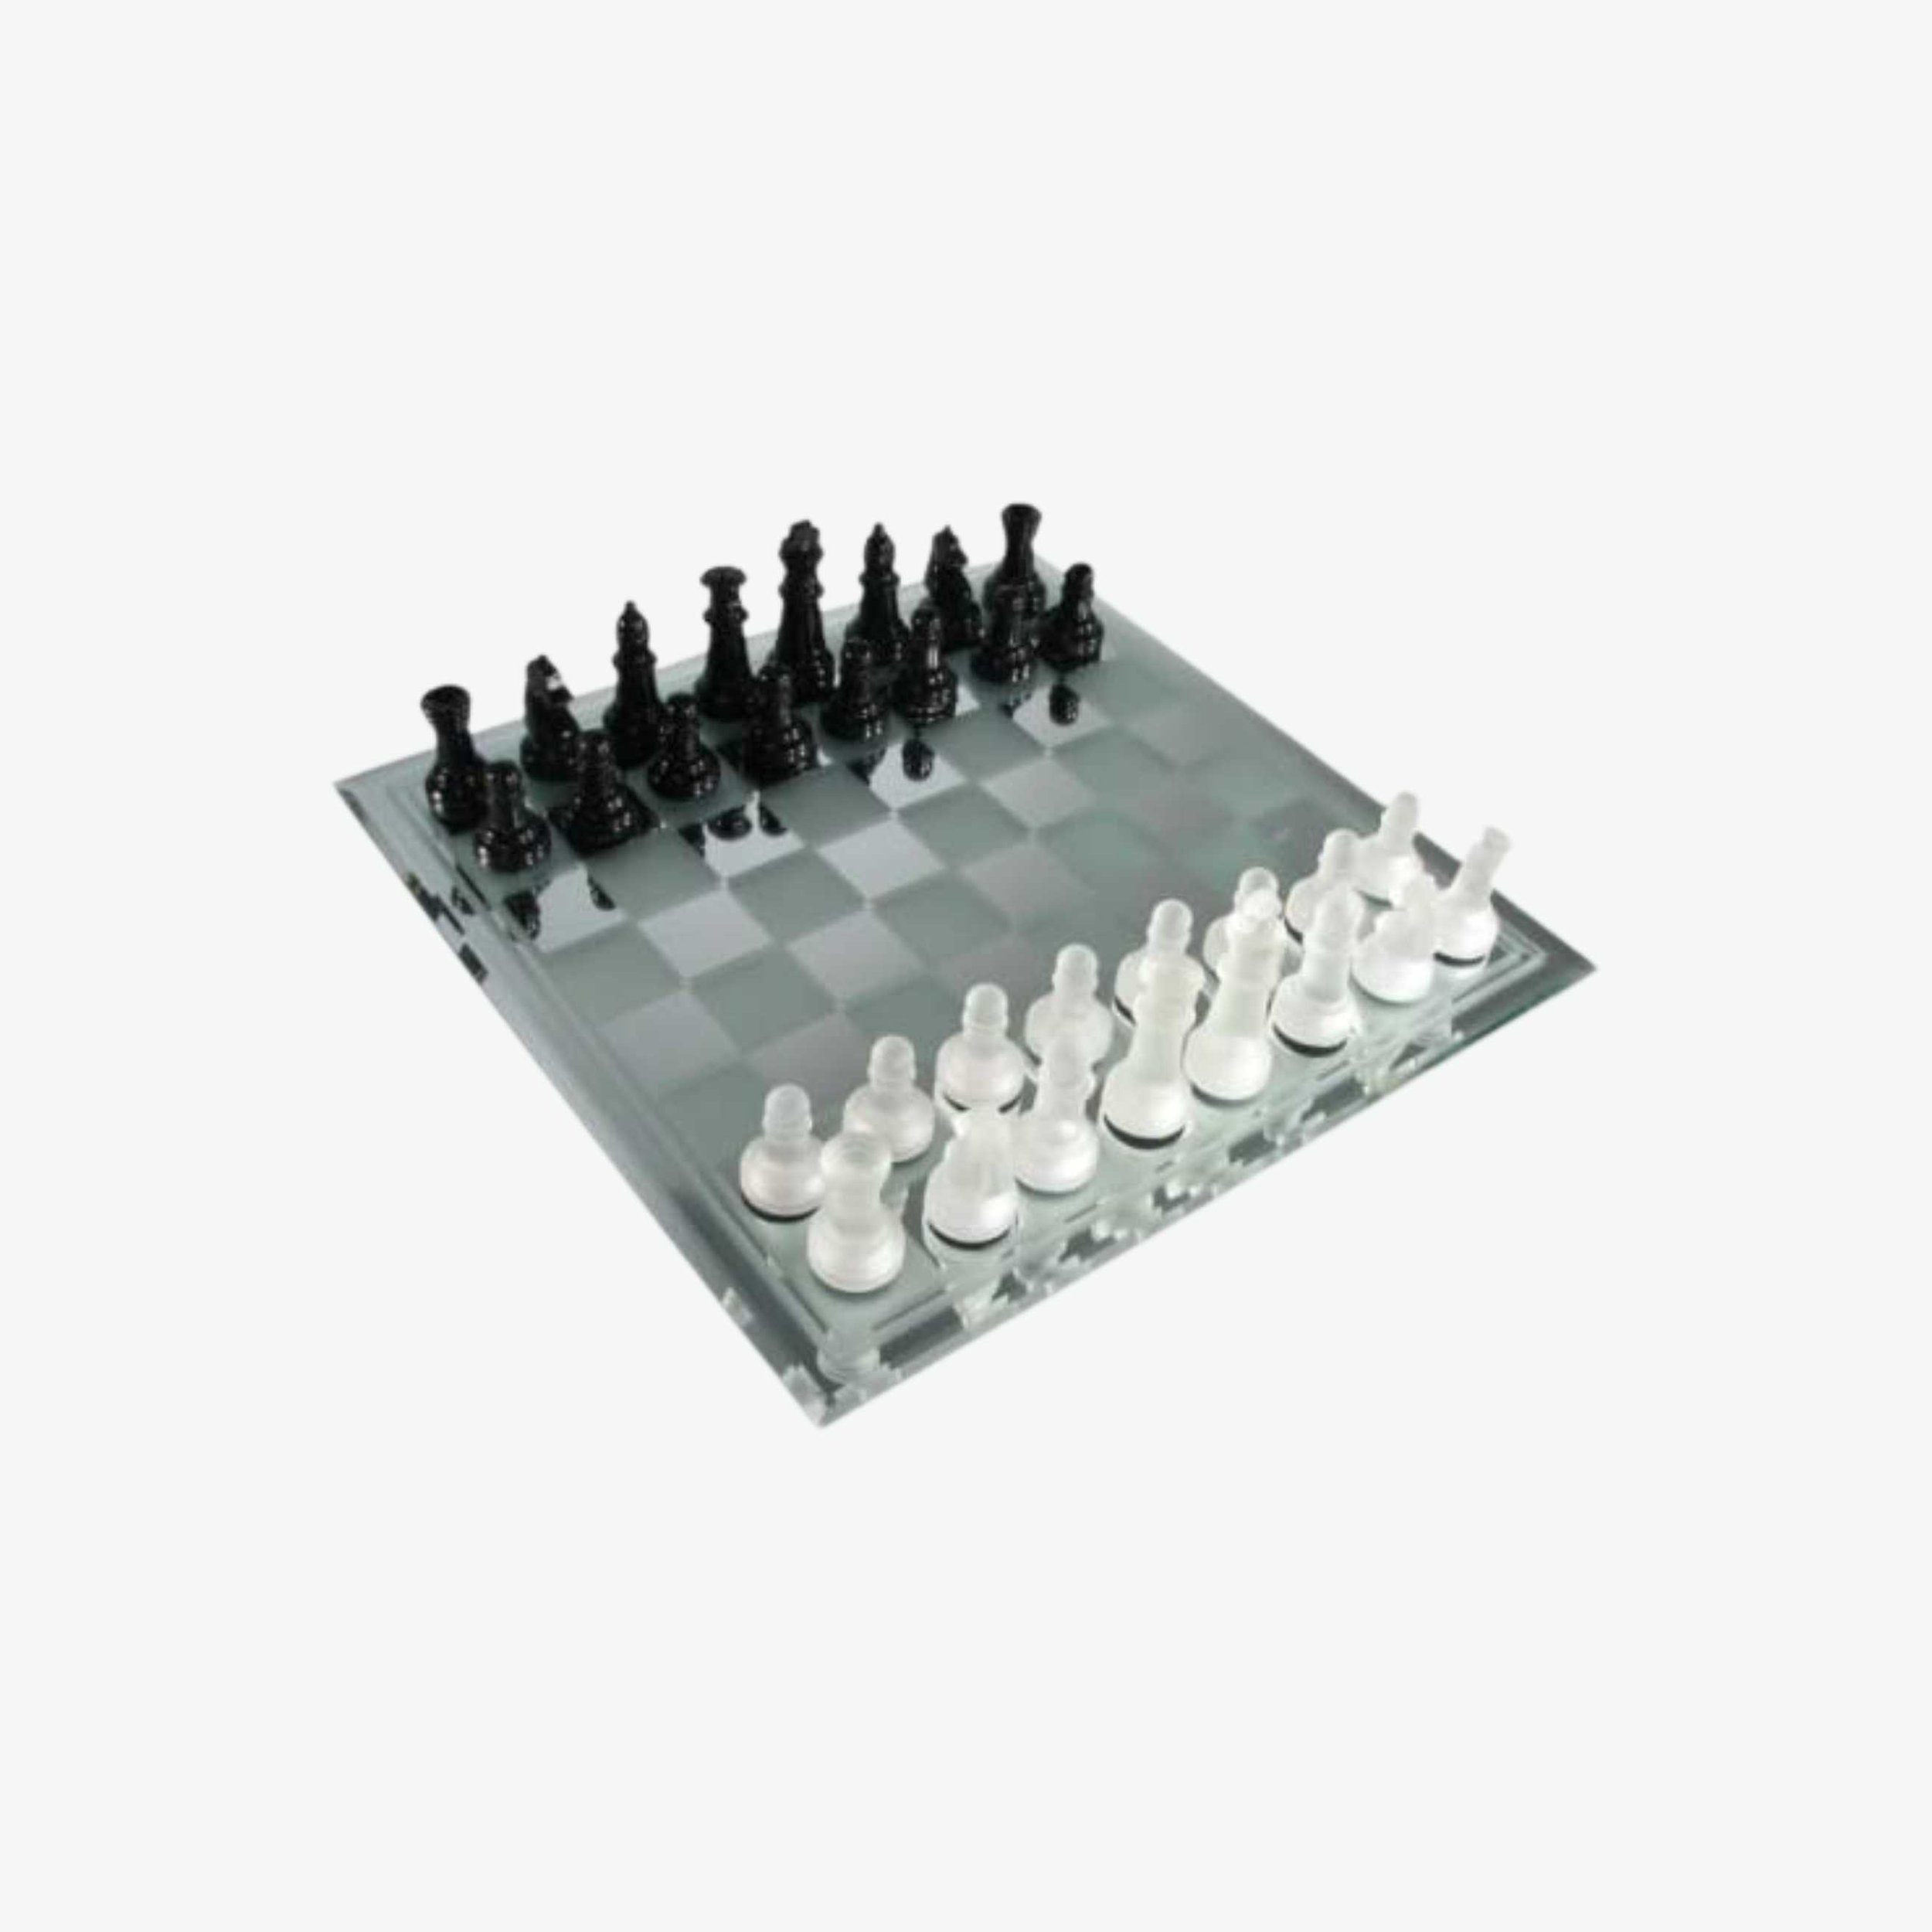 Frosted Glass Chess Set.jpg